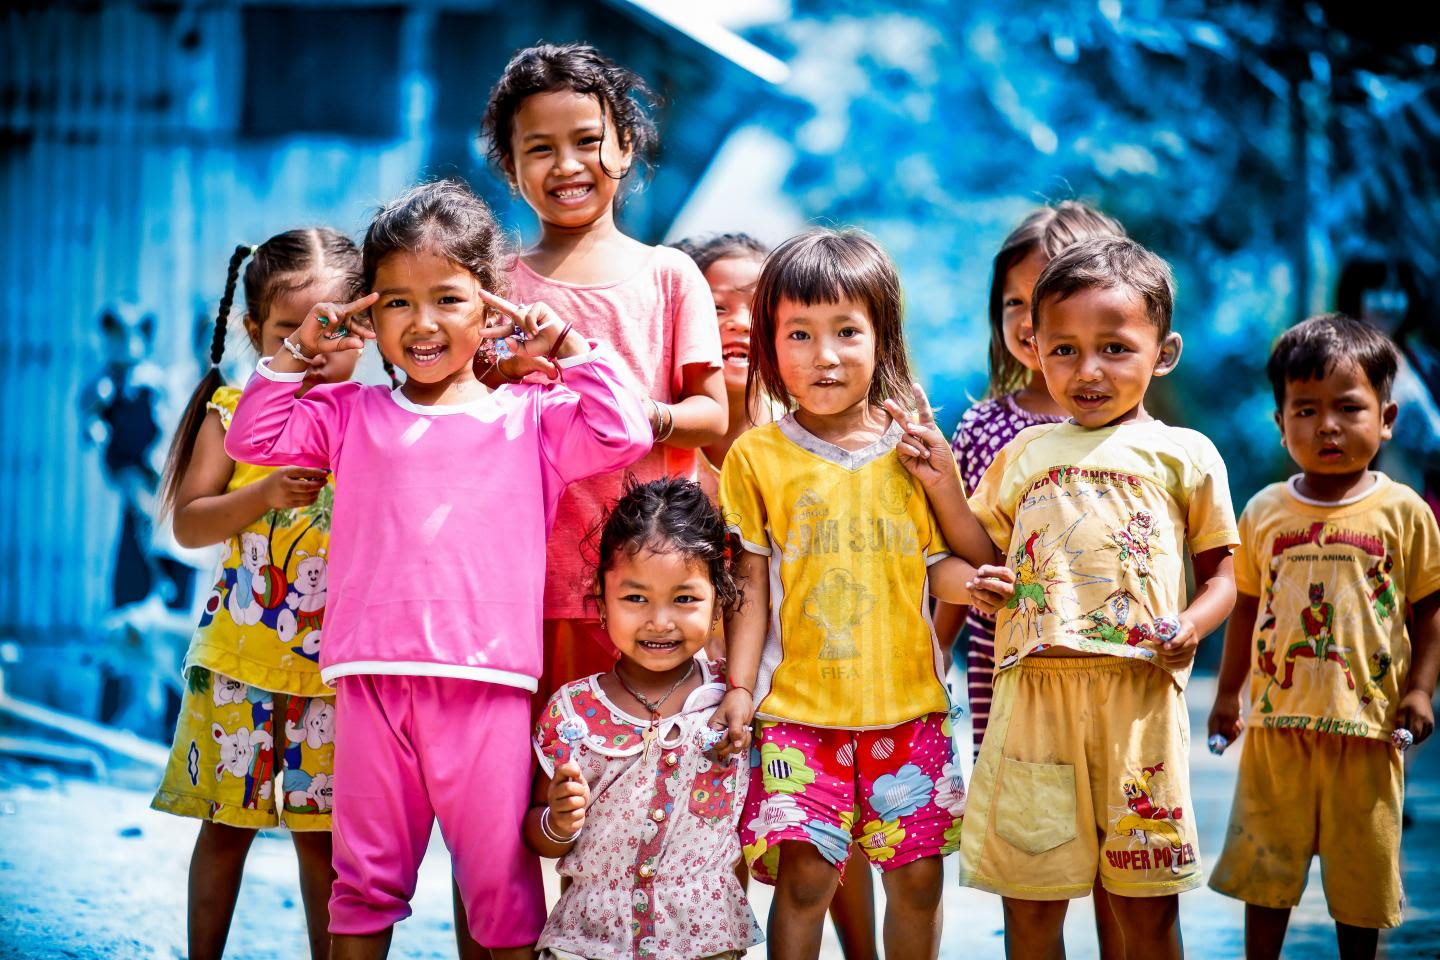 UNICEF is the global leader promoting and protecting children’s rights in 190 countries, including Viet Nam